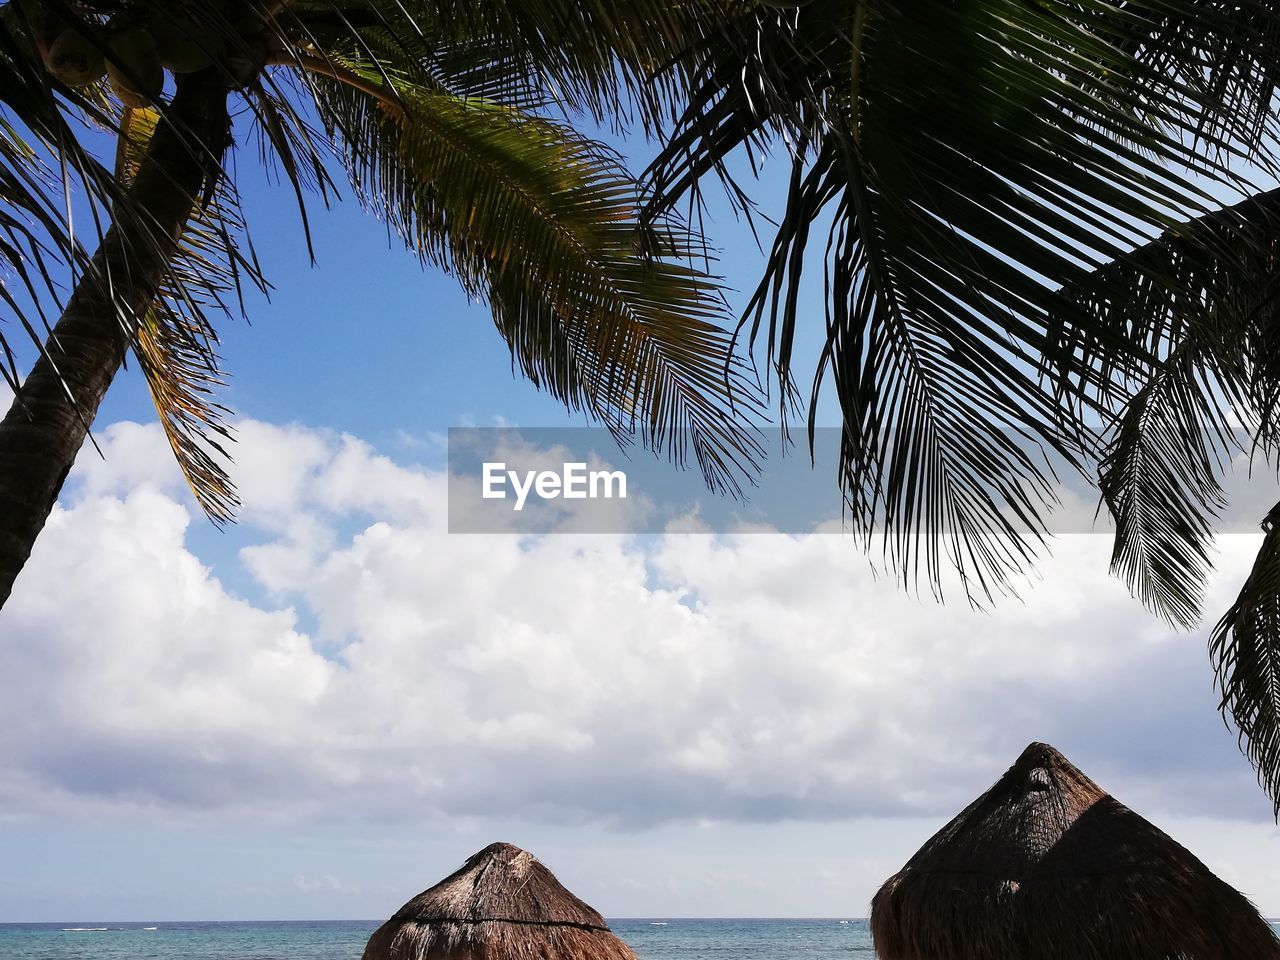 PANORAMIC VIEW OF PALM TREES ON BEACH AGAINST SKY